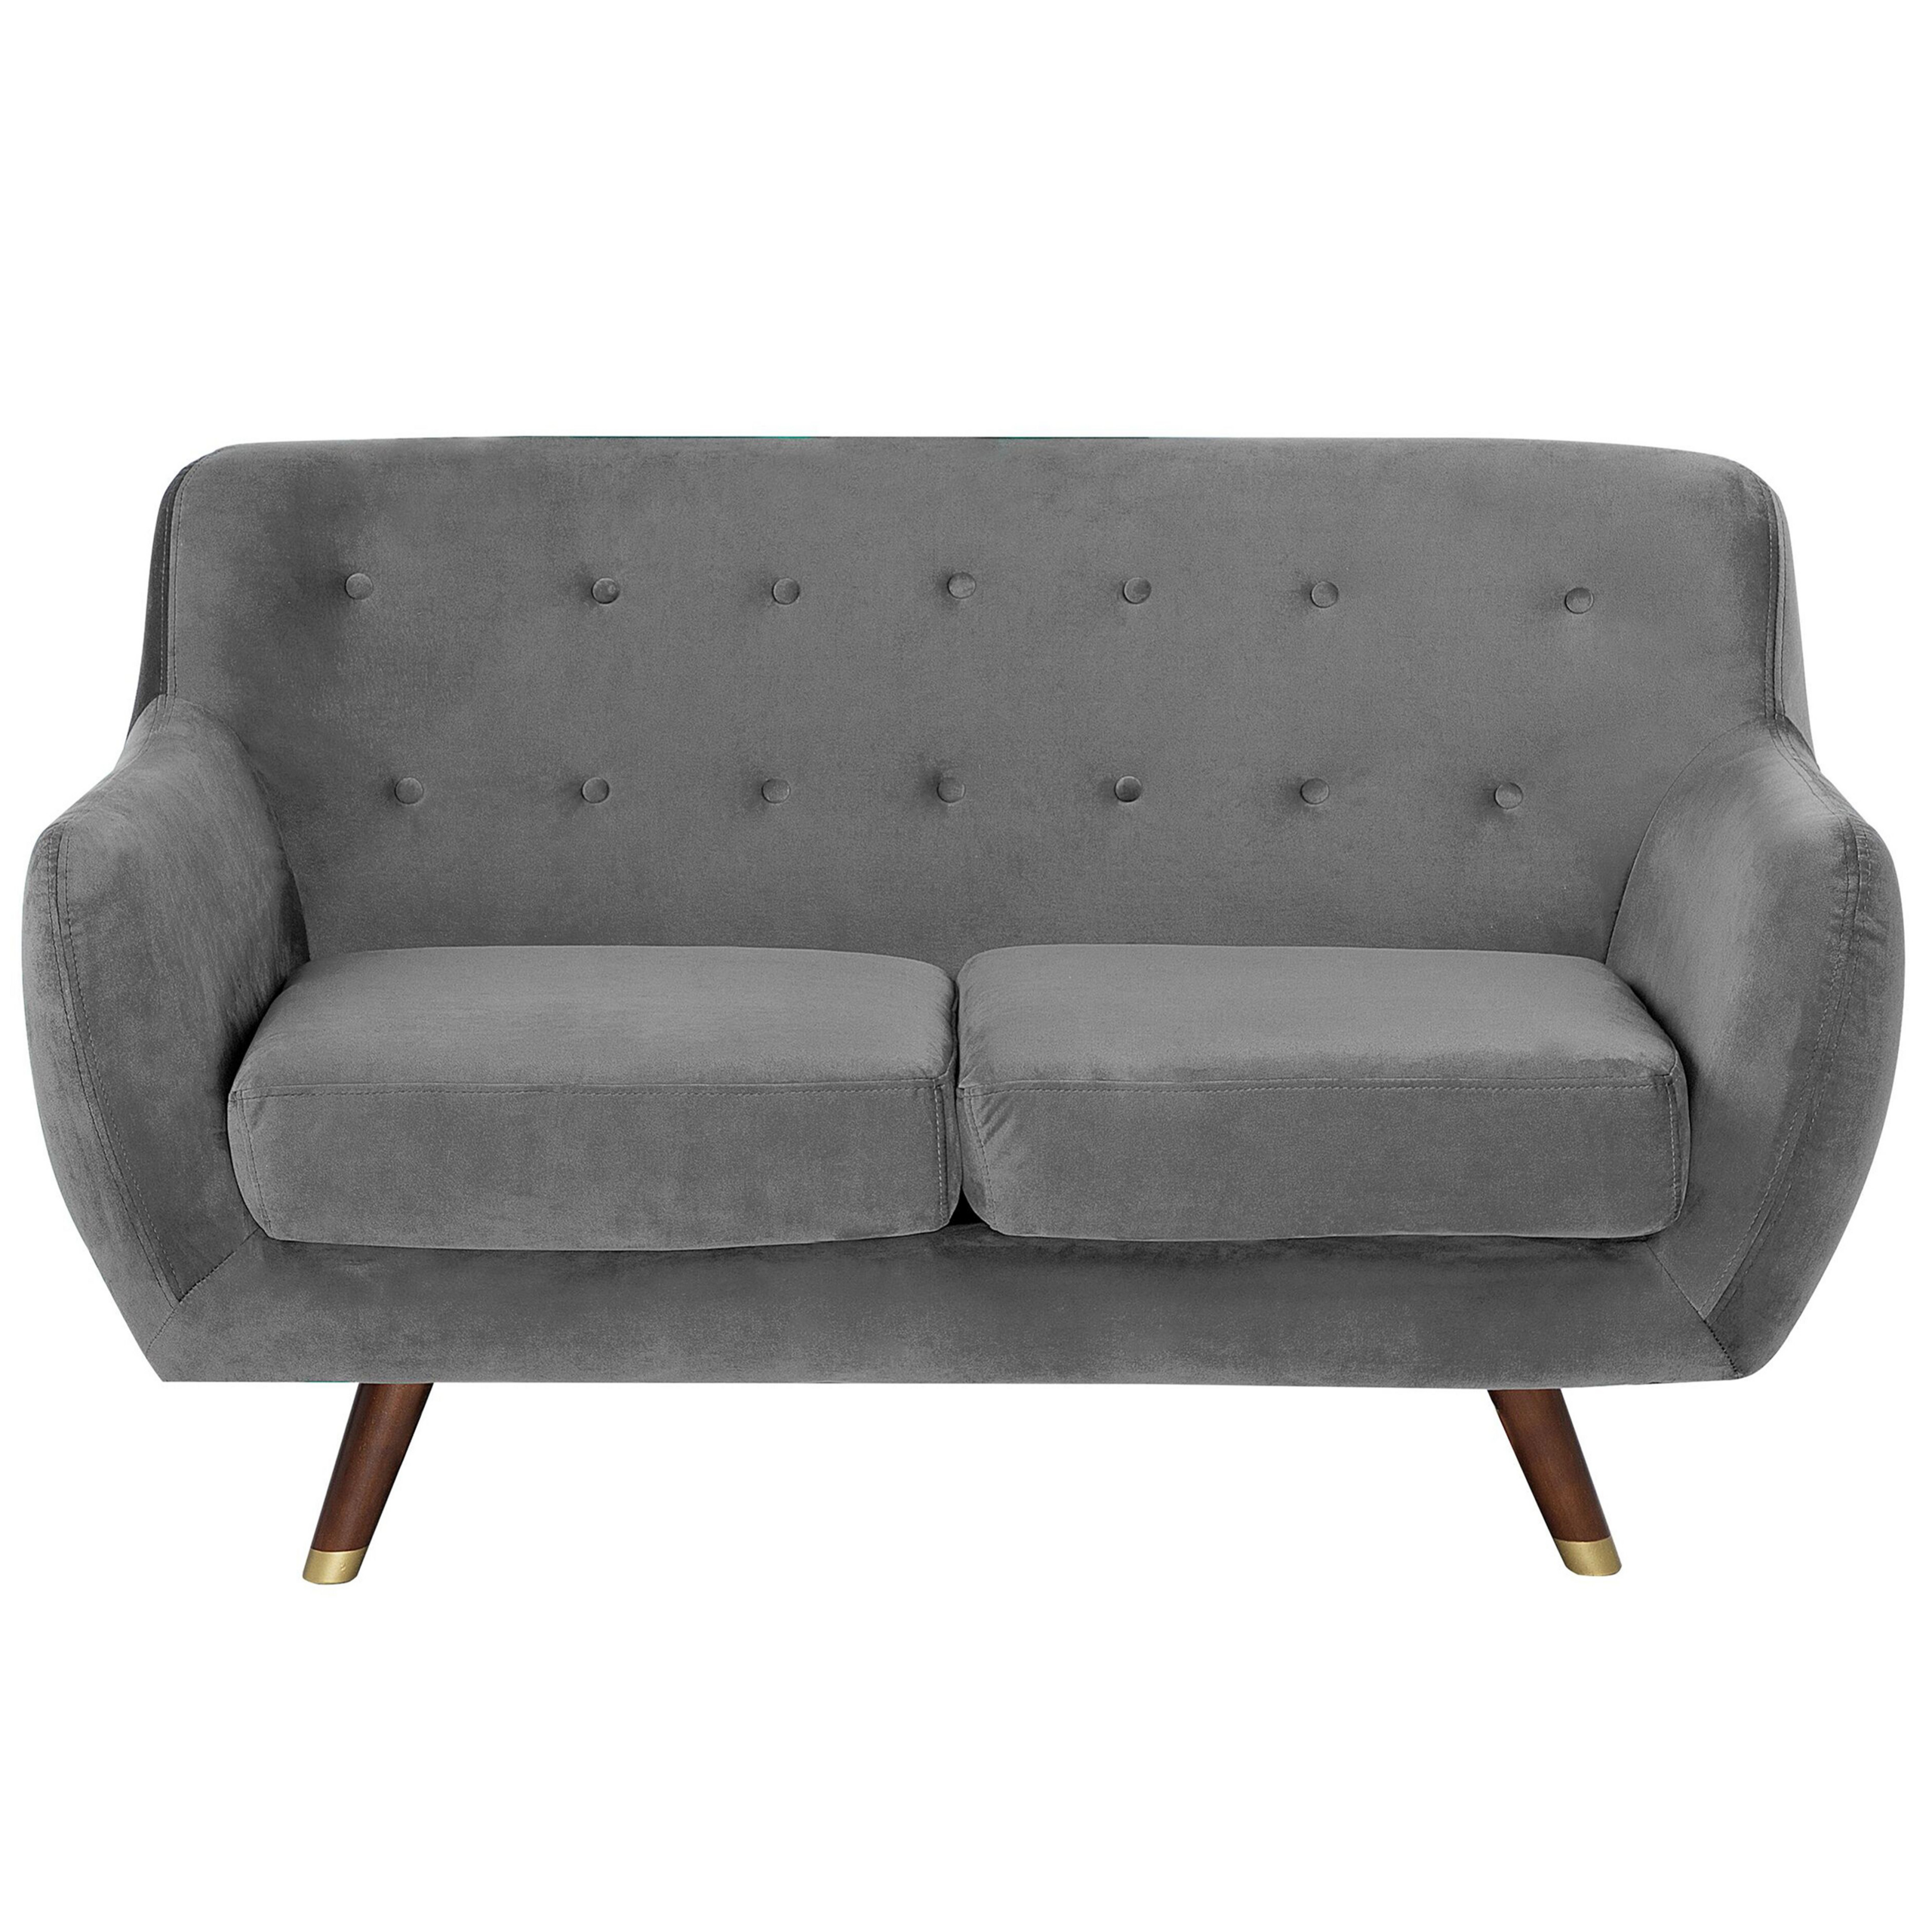 Beliani Sofa Grey Velvet 2 Seater Button Tufted Back Cushioned Seat Wooden Legs